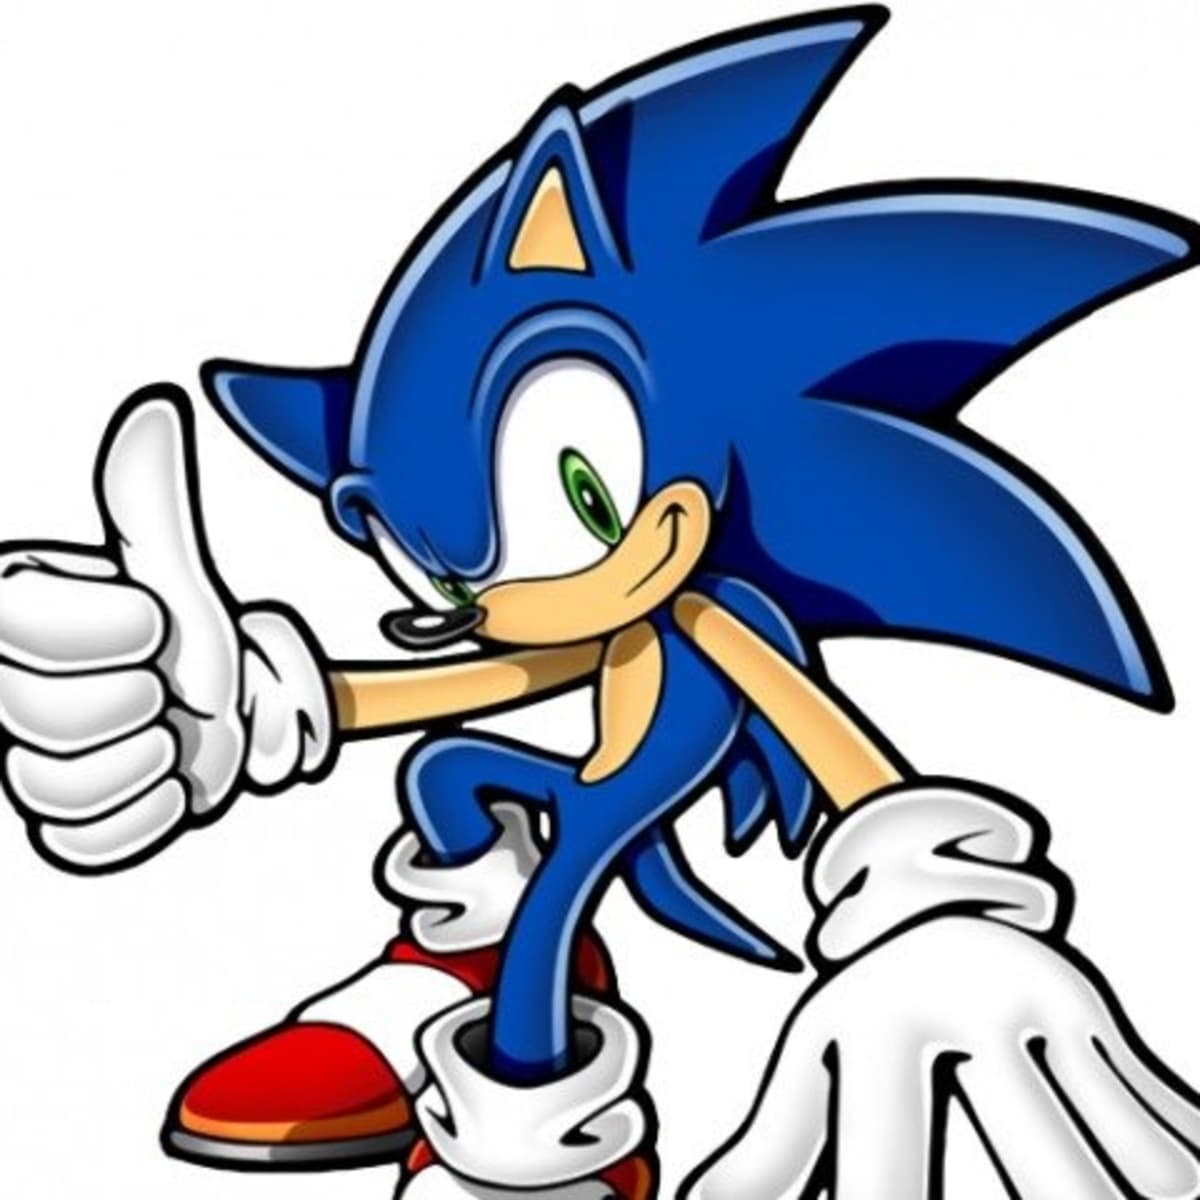 Darkspine Sonic in all his glory, Sonic the Hedgehog